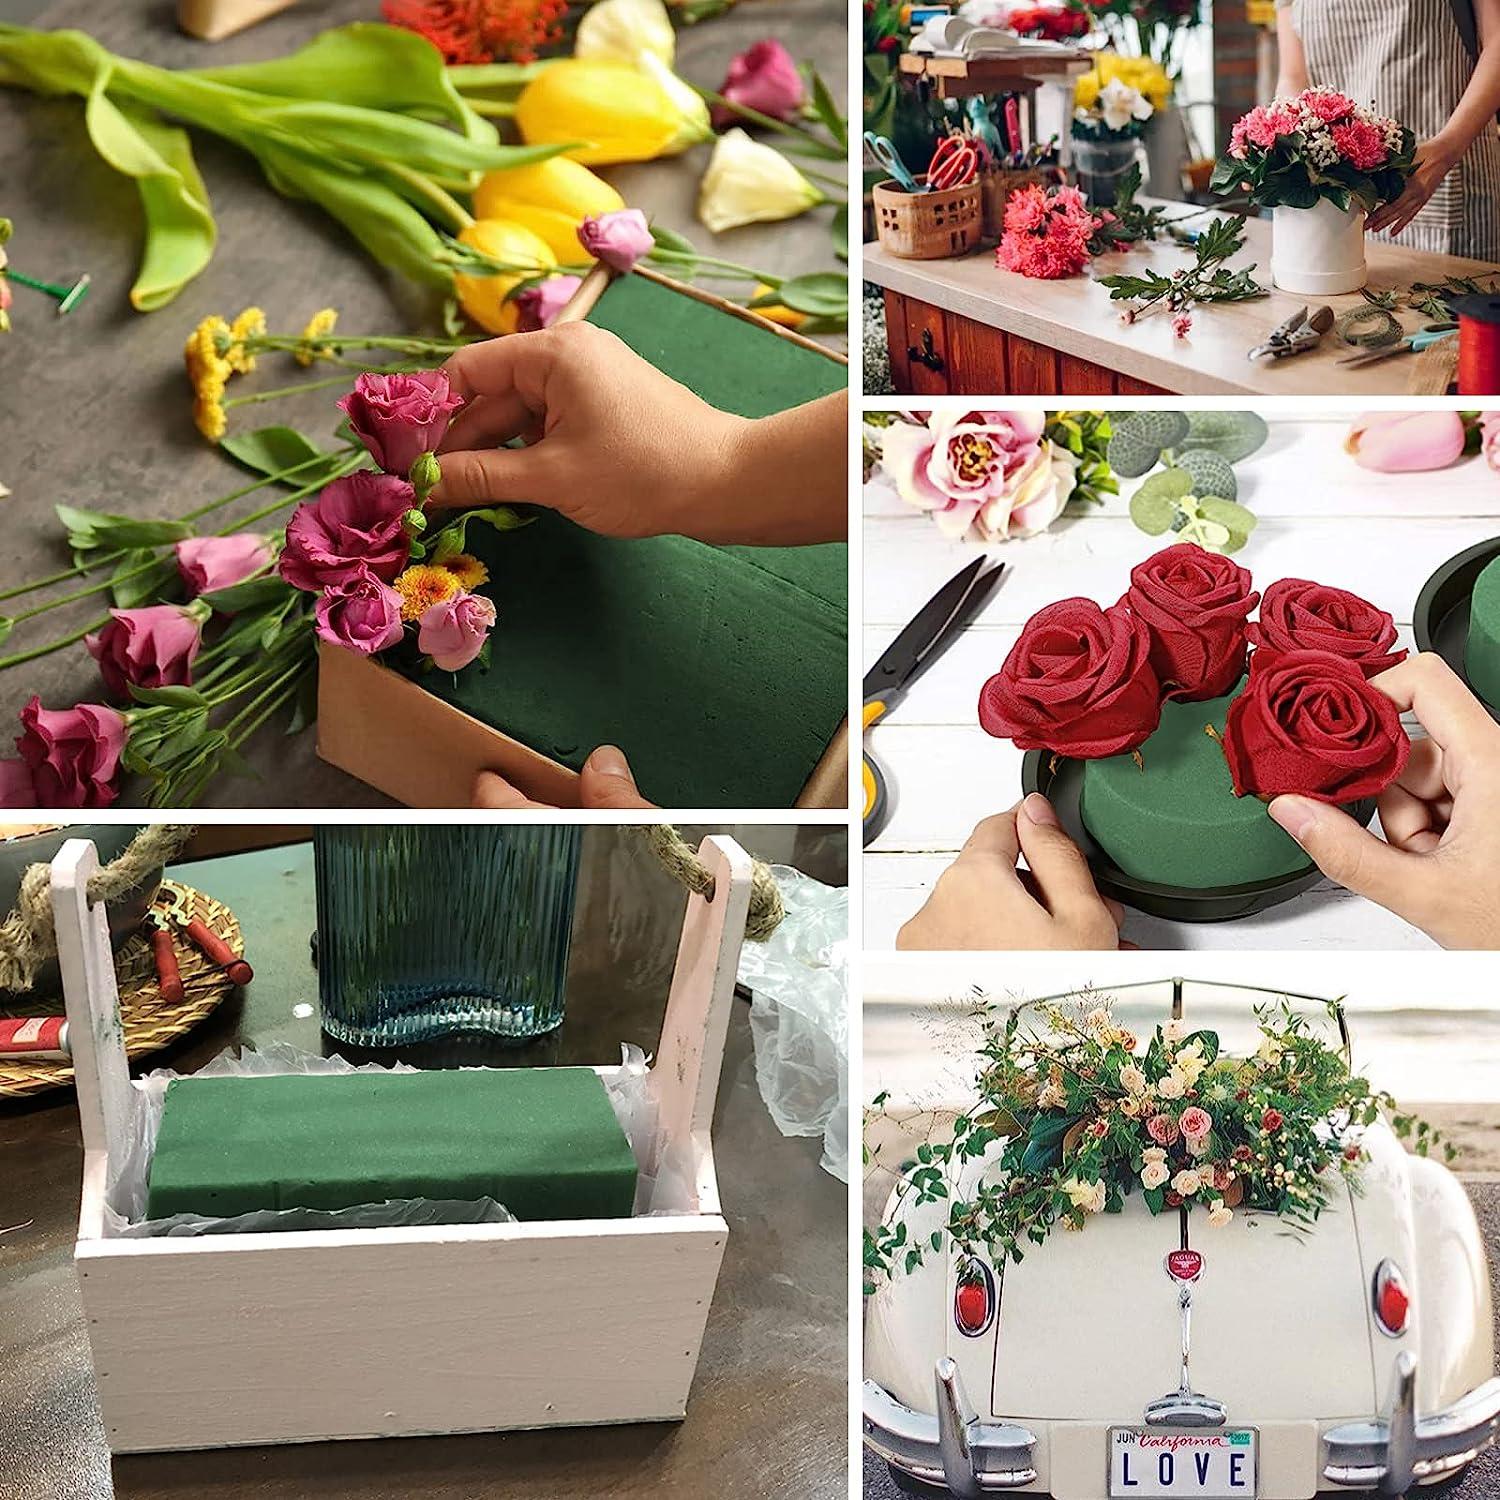 Red Paper Flowers Floral Foam Blocks For Crafts Wet Florist Artificial And  Fresh Arrangement 9.1X4.3X2.95 Inch From Lubufang, $13.43